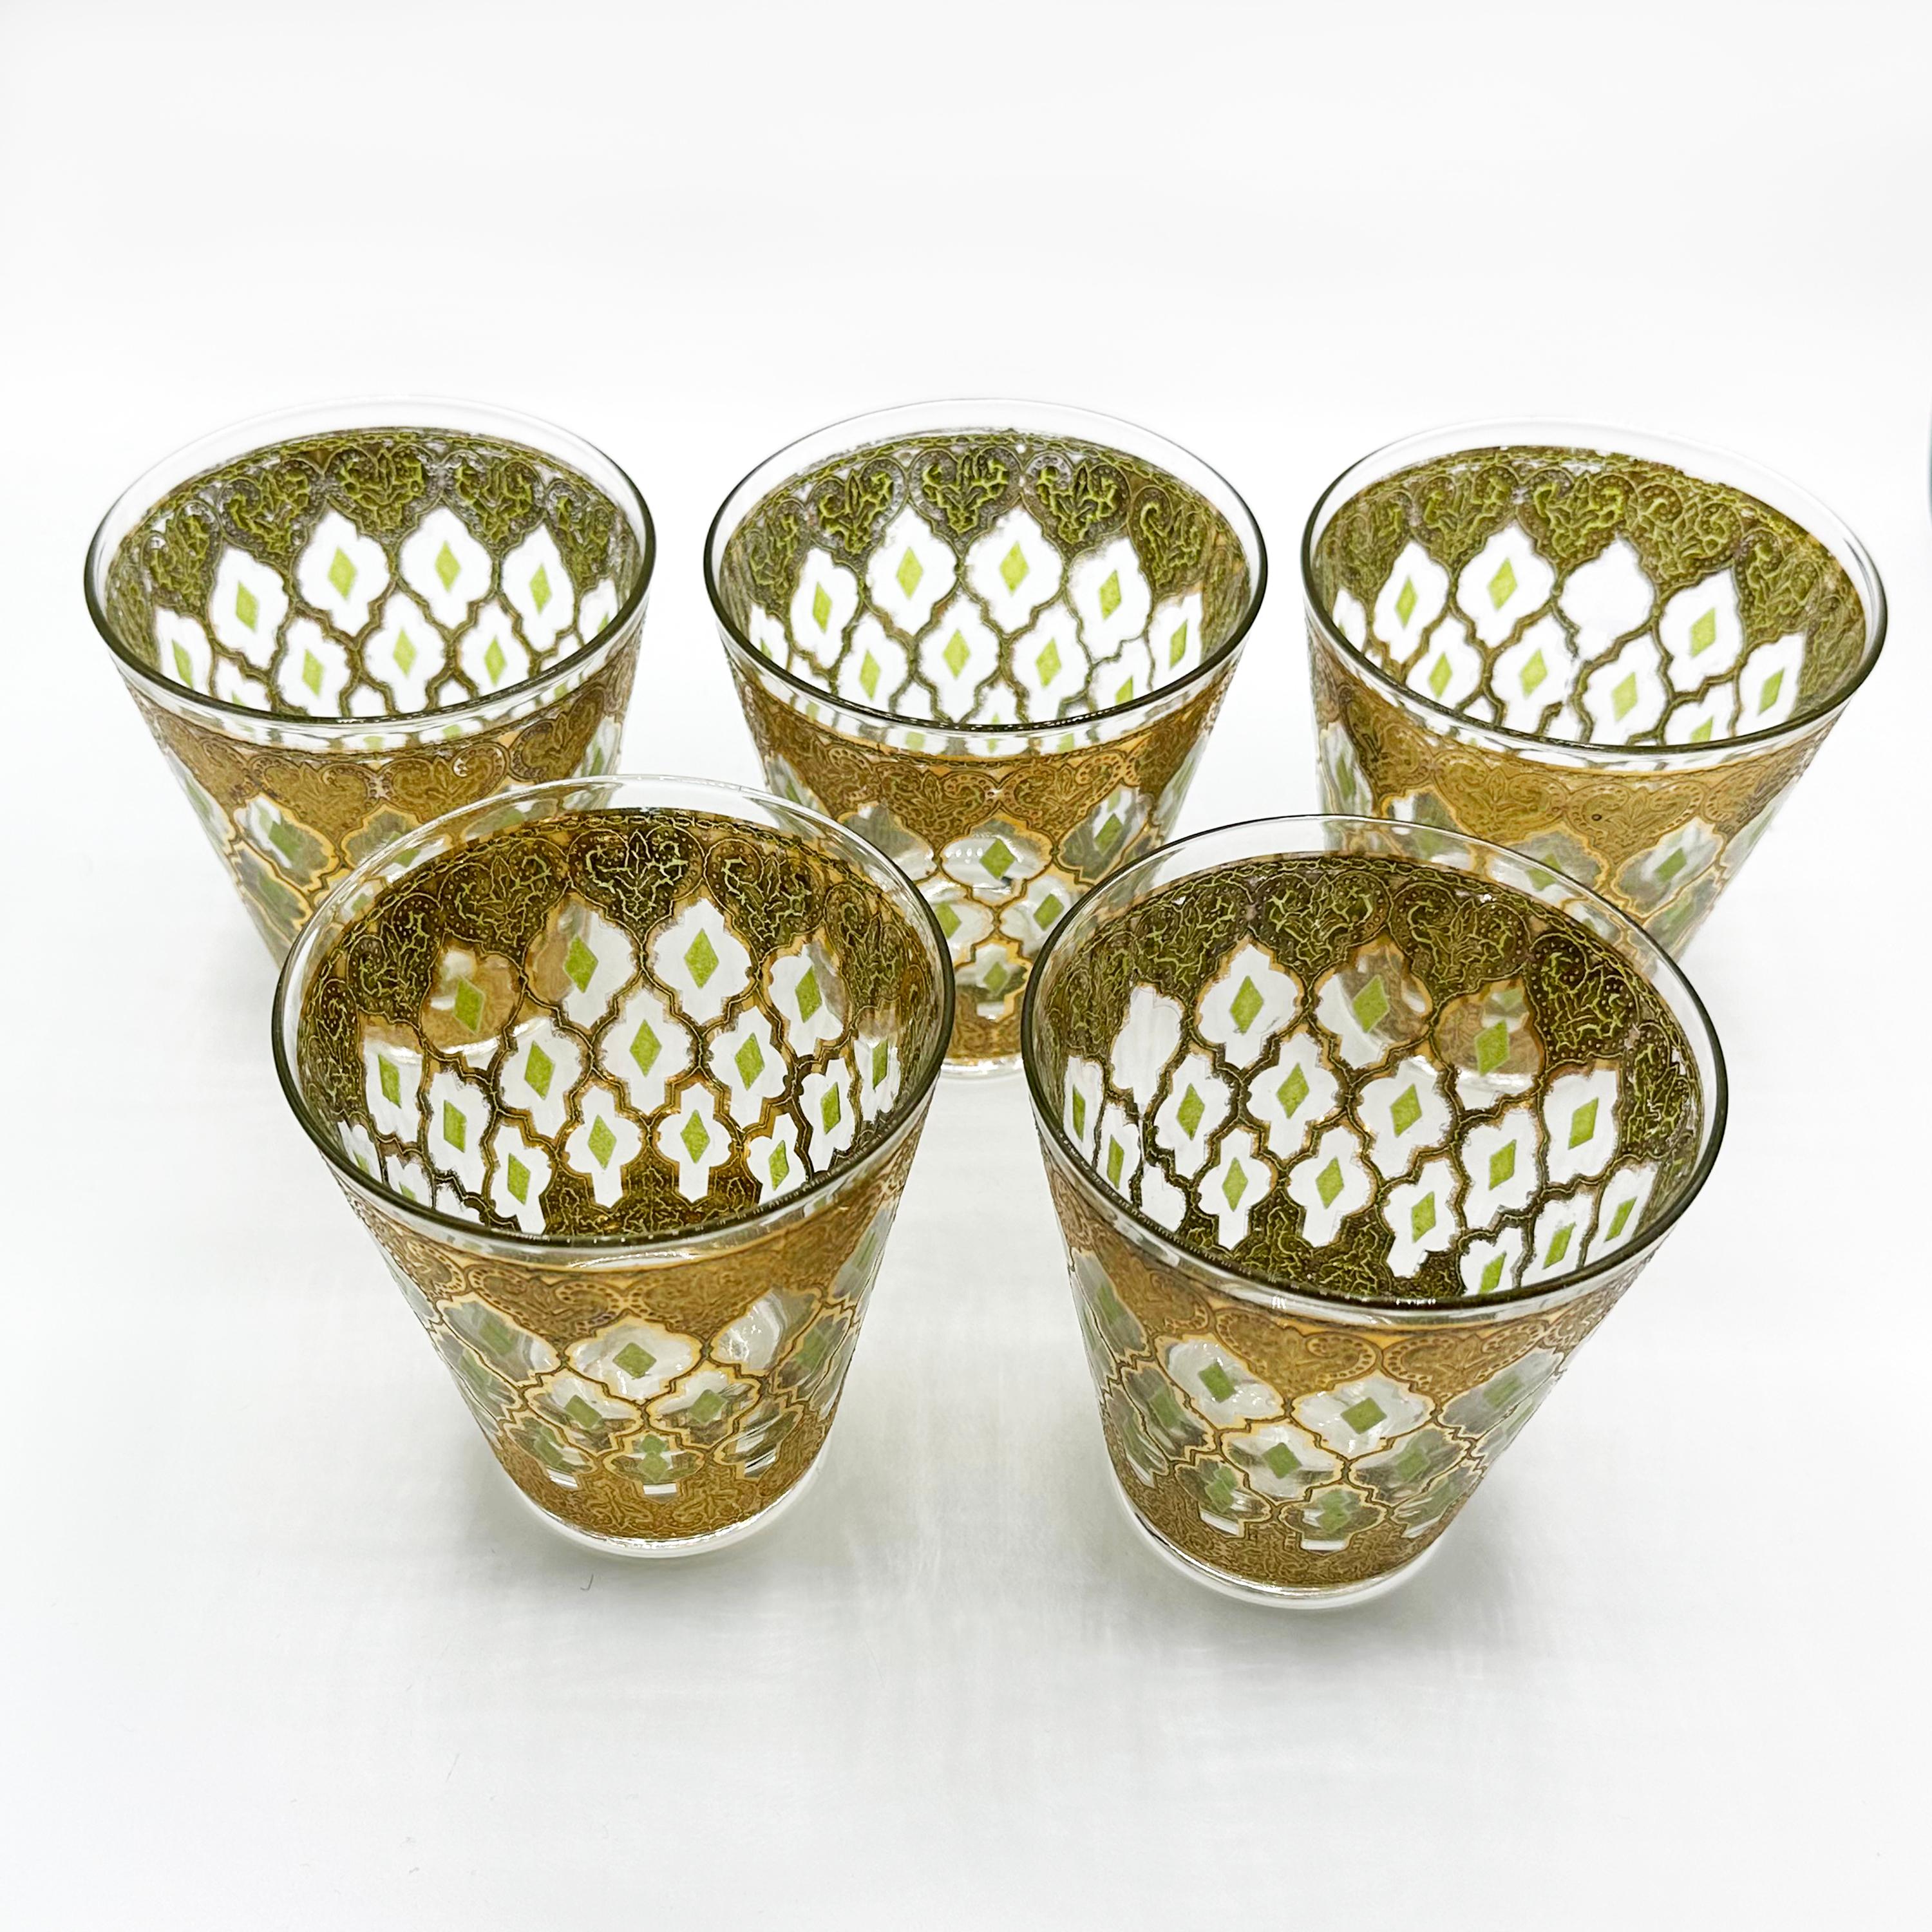 Elevate your drinking experience with this set of 5 vintage Valencia Culver old fashioned drinking glasses. The glasses feature a stunning Regency style with intricate gold detailing that adds a touch of elegance to any occasion. Crafted from